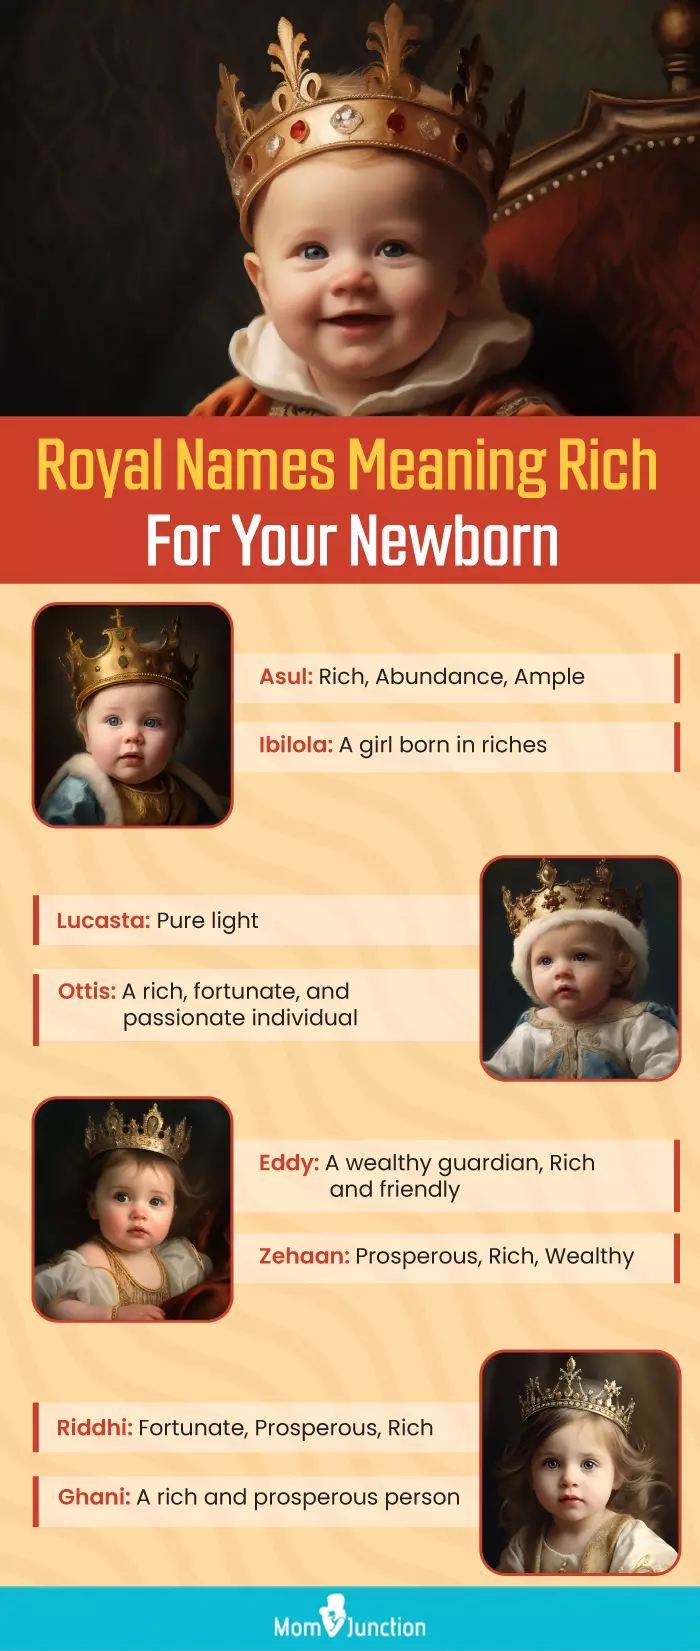 royal names meaning rich for your newborn (infographic)